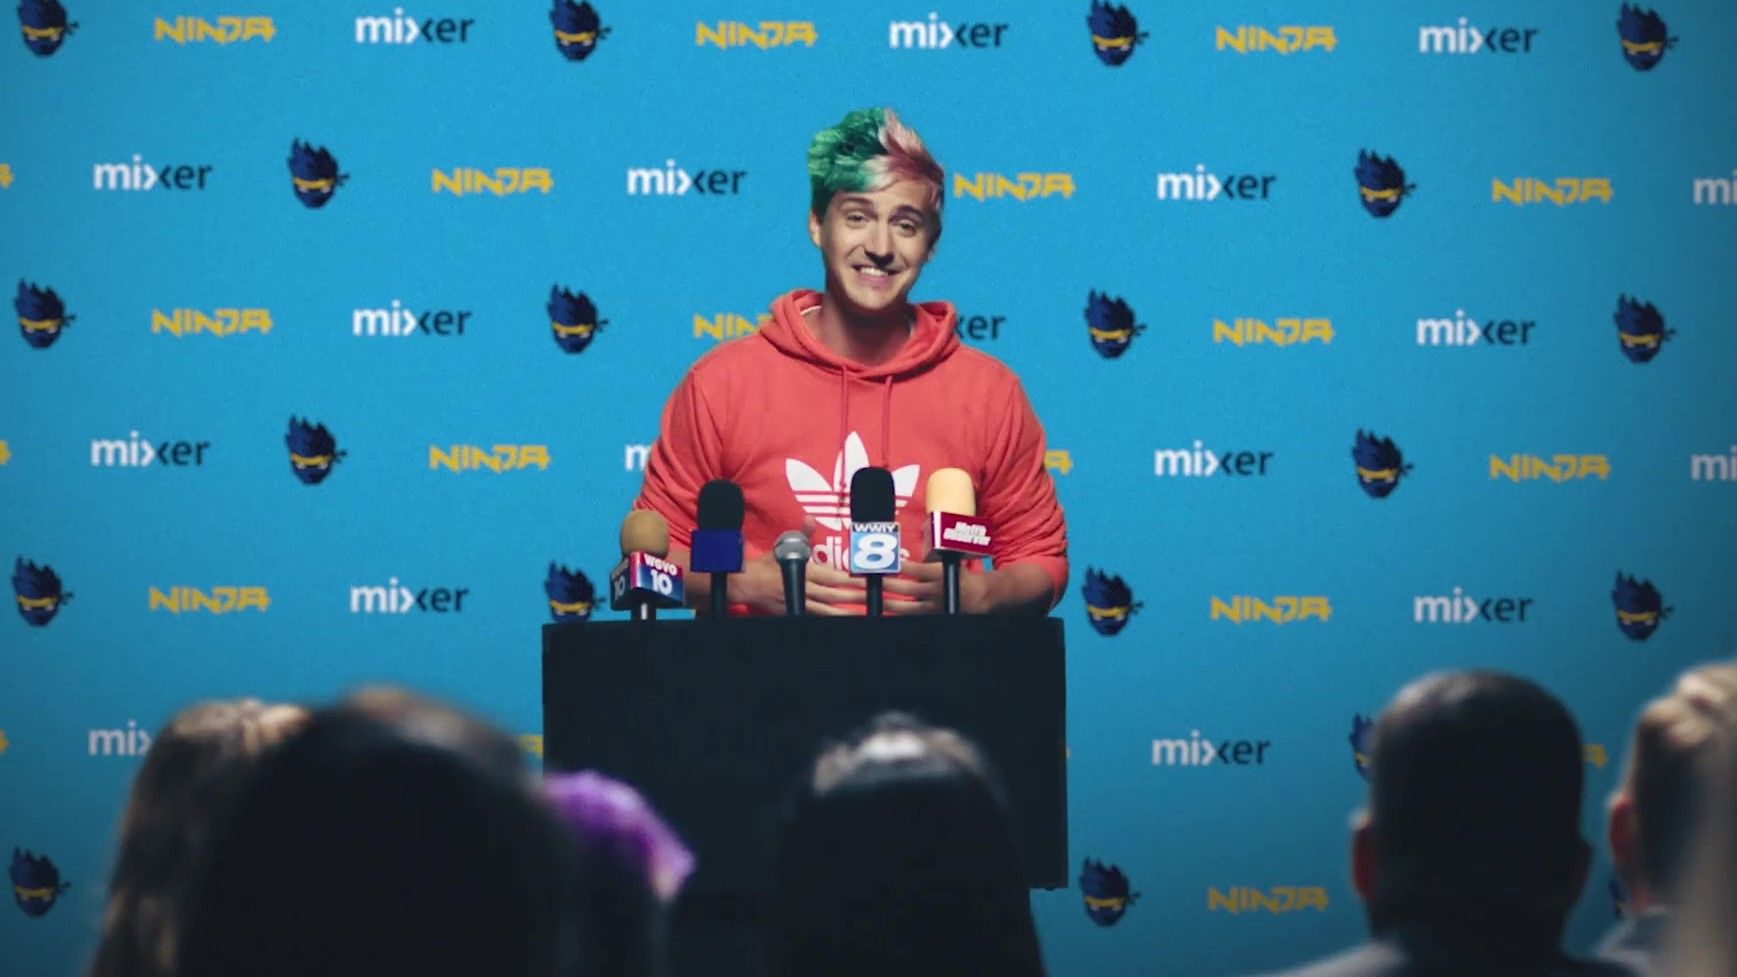 Ninja's Mixer Deal Hasn't Uplifted the Platform, and Microsoft Is Cool With That